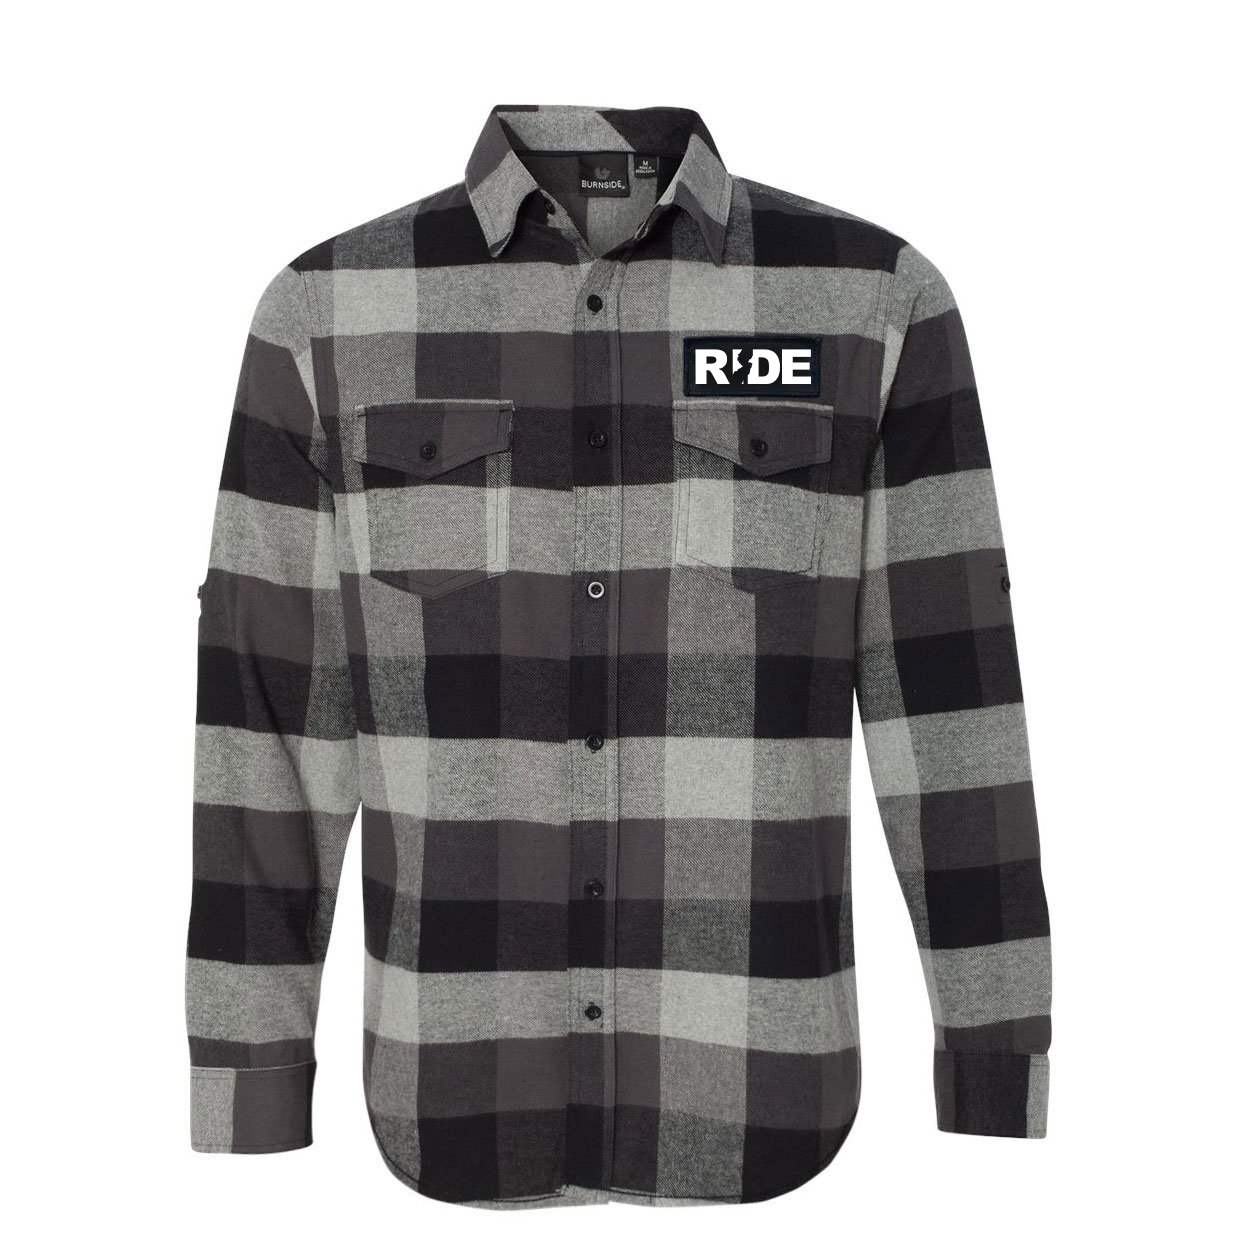 Ride New Jersey Classic Unisex Long Sleeve Woven Patch Flannel Shirt Black/Gray (White Logo)